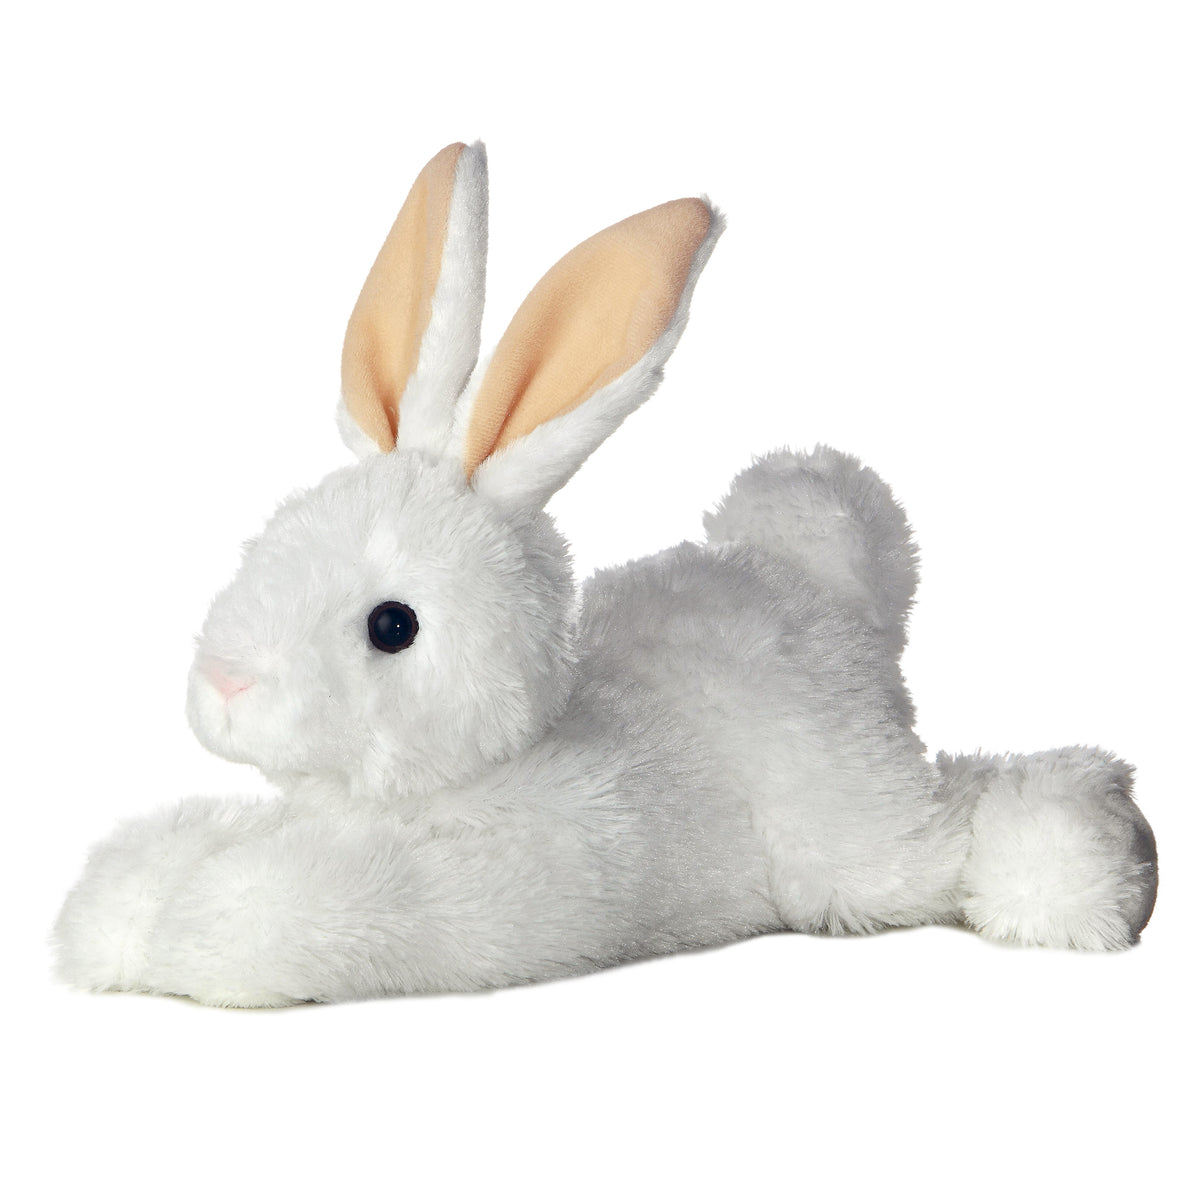 Chastity bunny plush from Flopsie, exuding tranquility and realism with her soft white fur